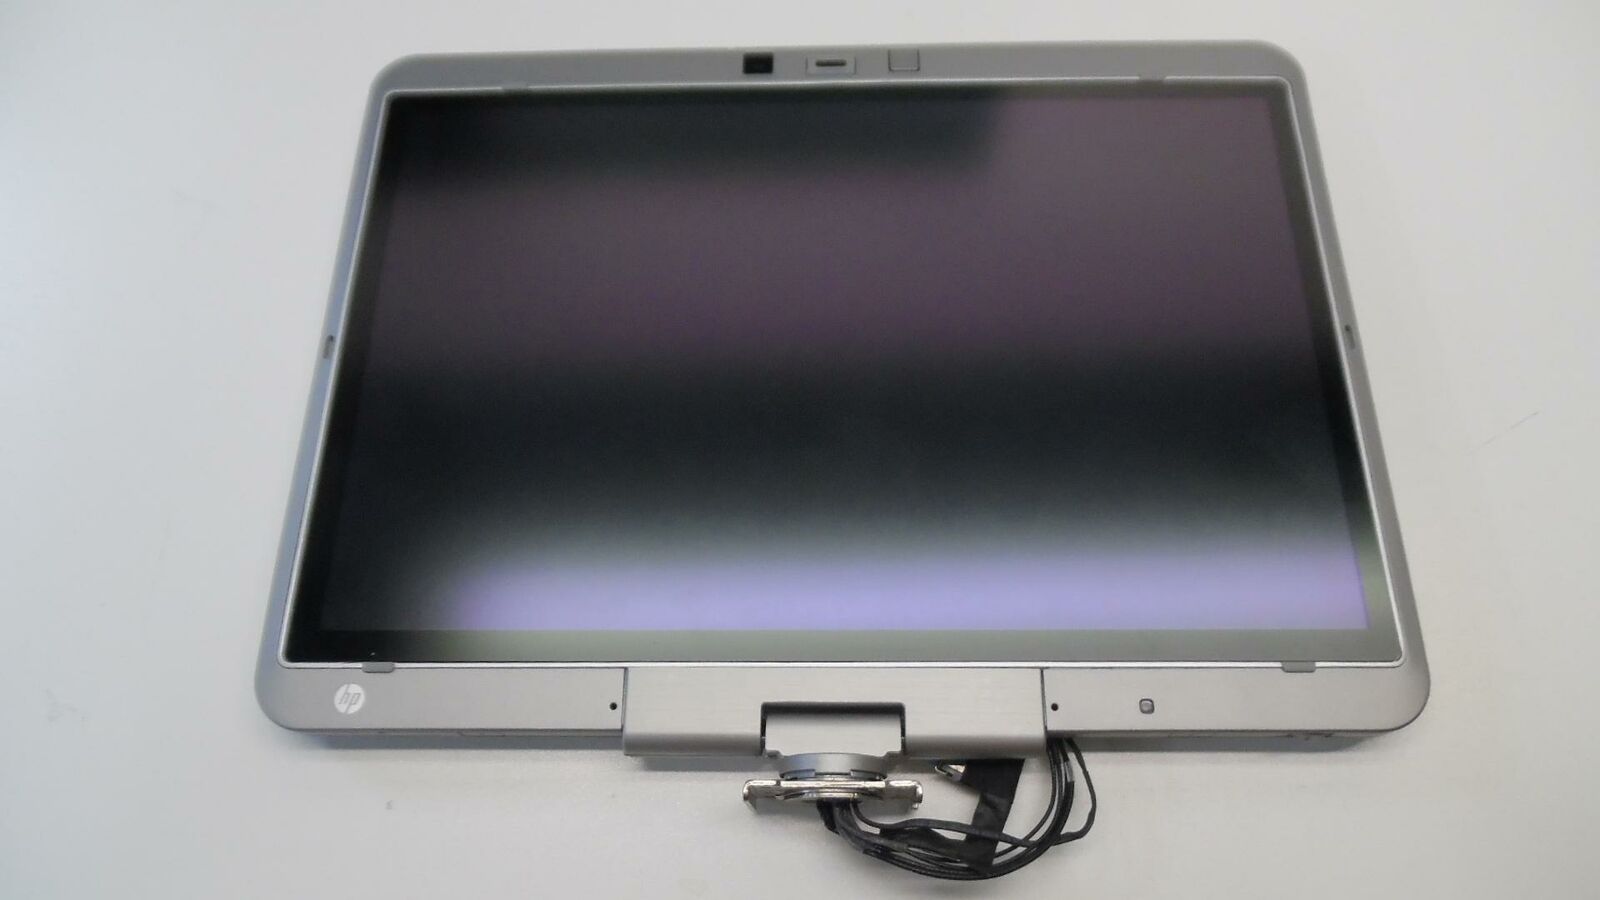 Original HP EliteBook 2740 Full Display Assembly w/Hinge & Cables - Tested